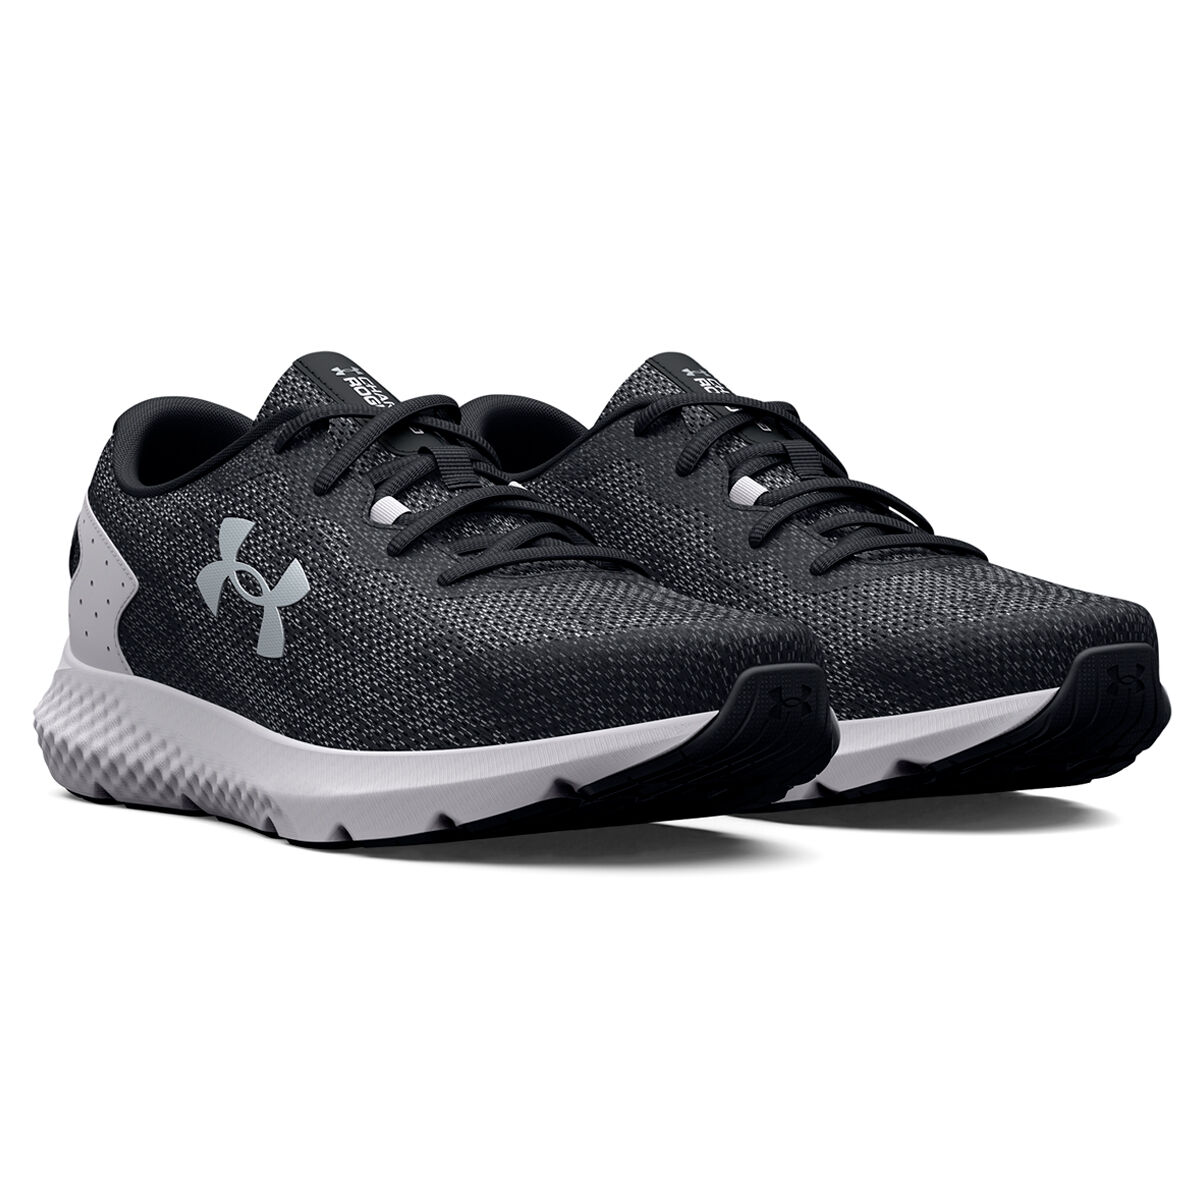 Under Armour Men's Charged Rogue 3 Running Shoes, Black,9.5 M US 